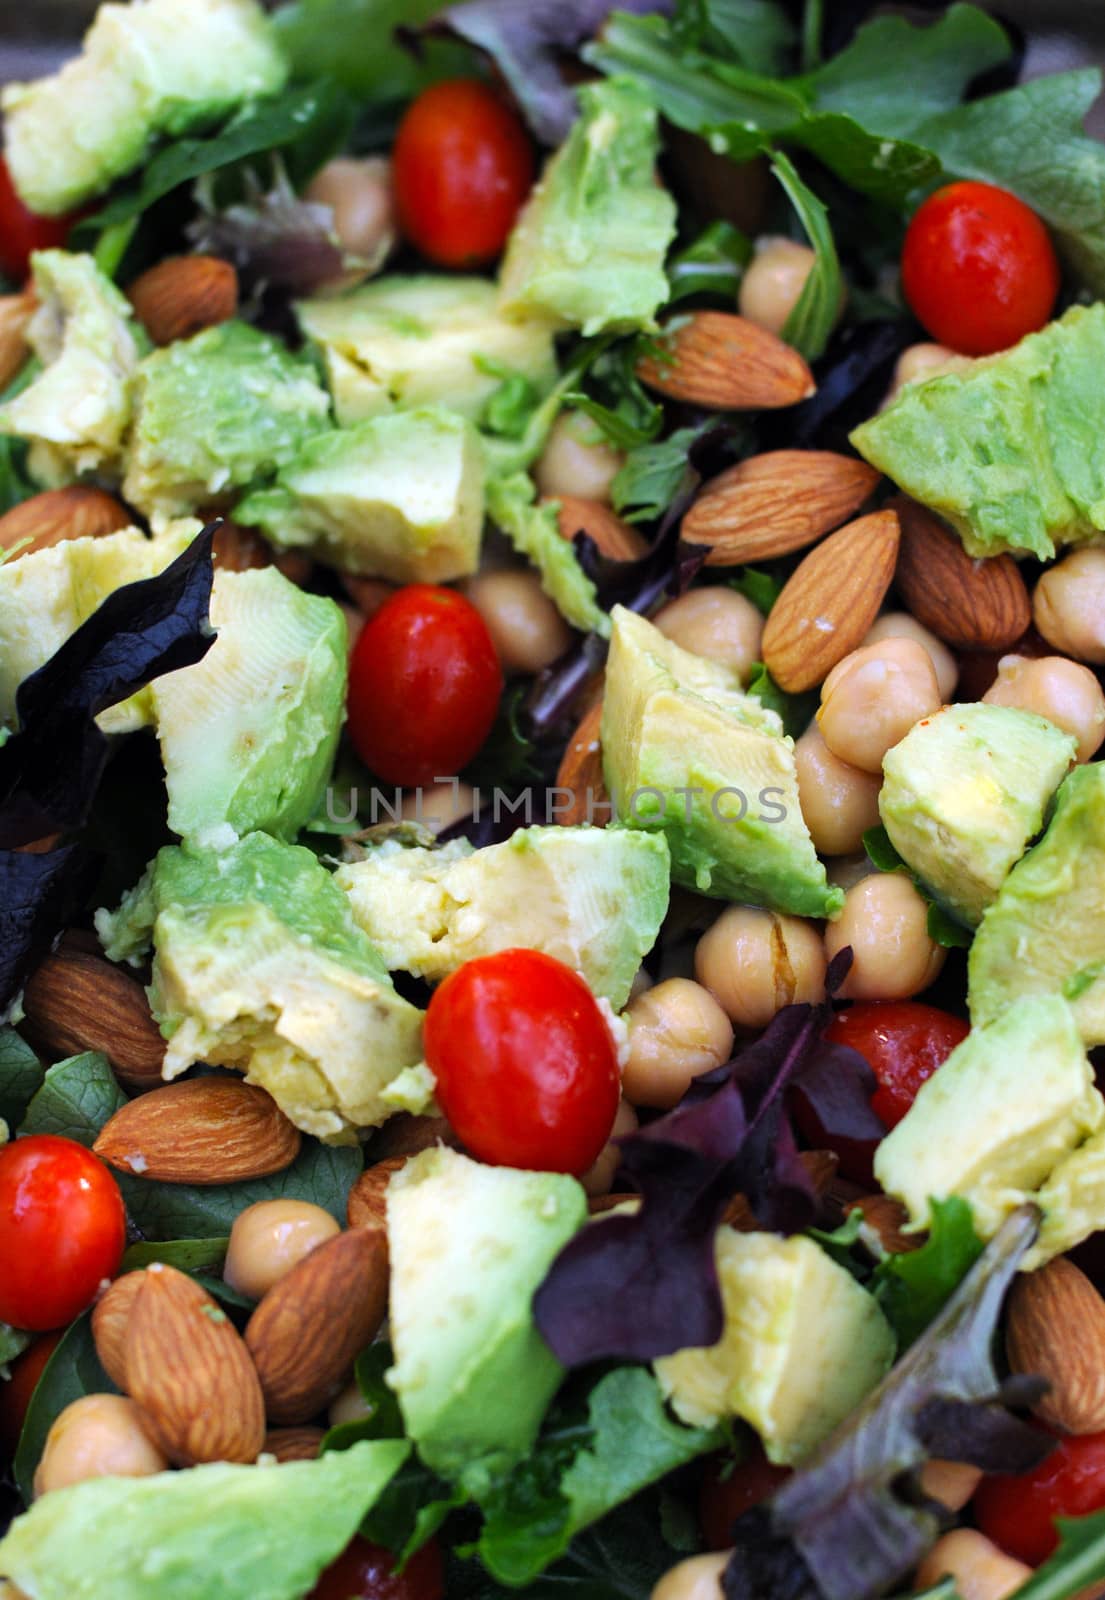 Healthy vegetarian salad with nuts and vegetables by ftlaudgirl